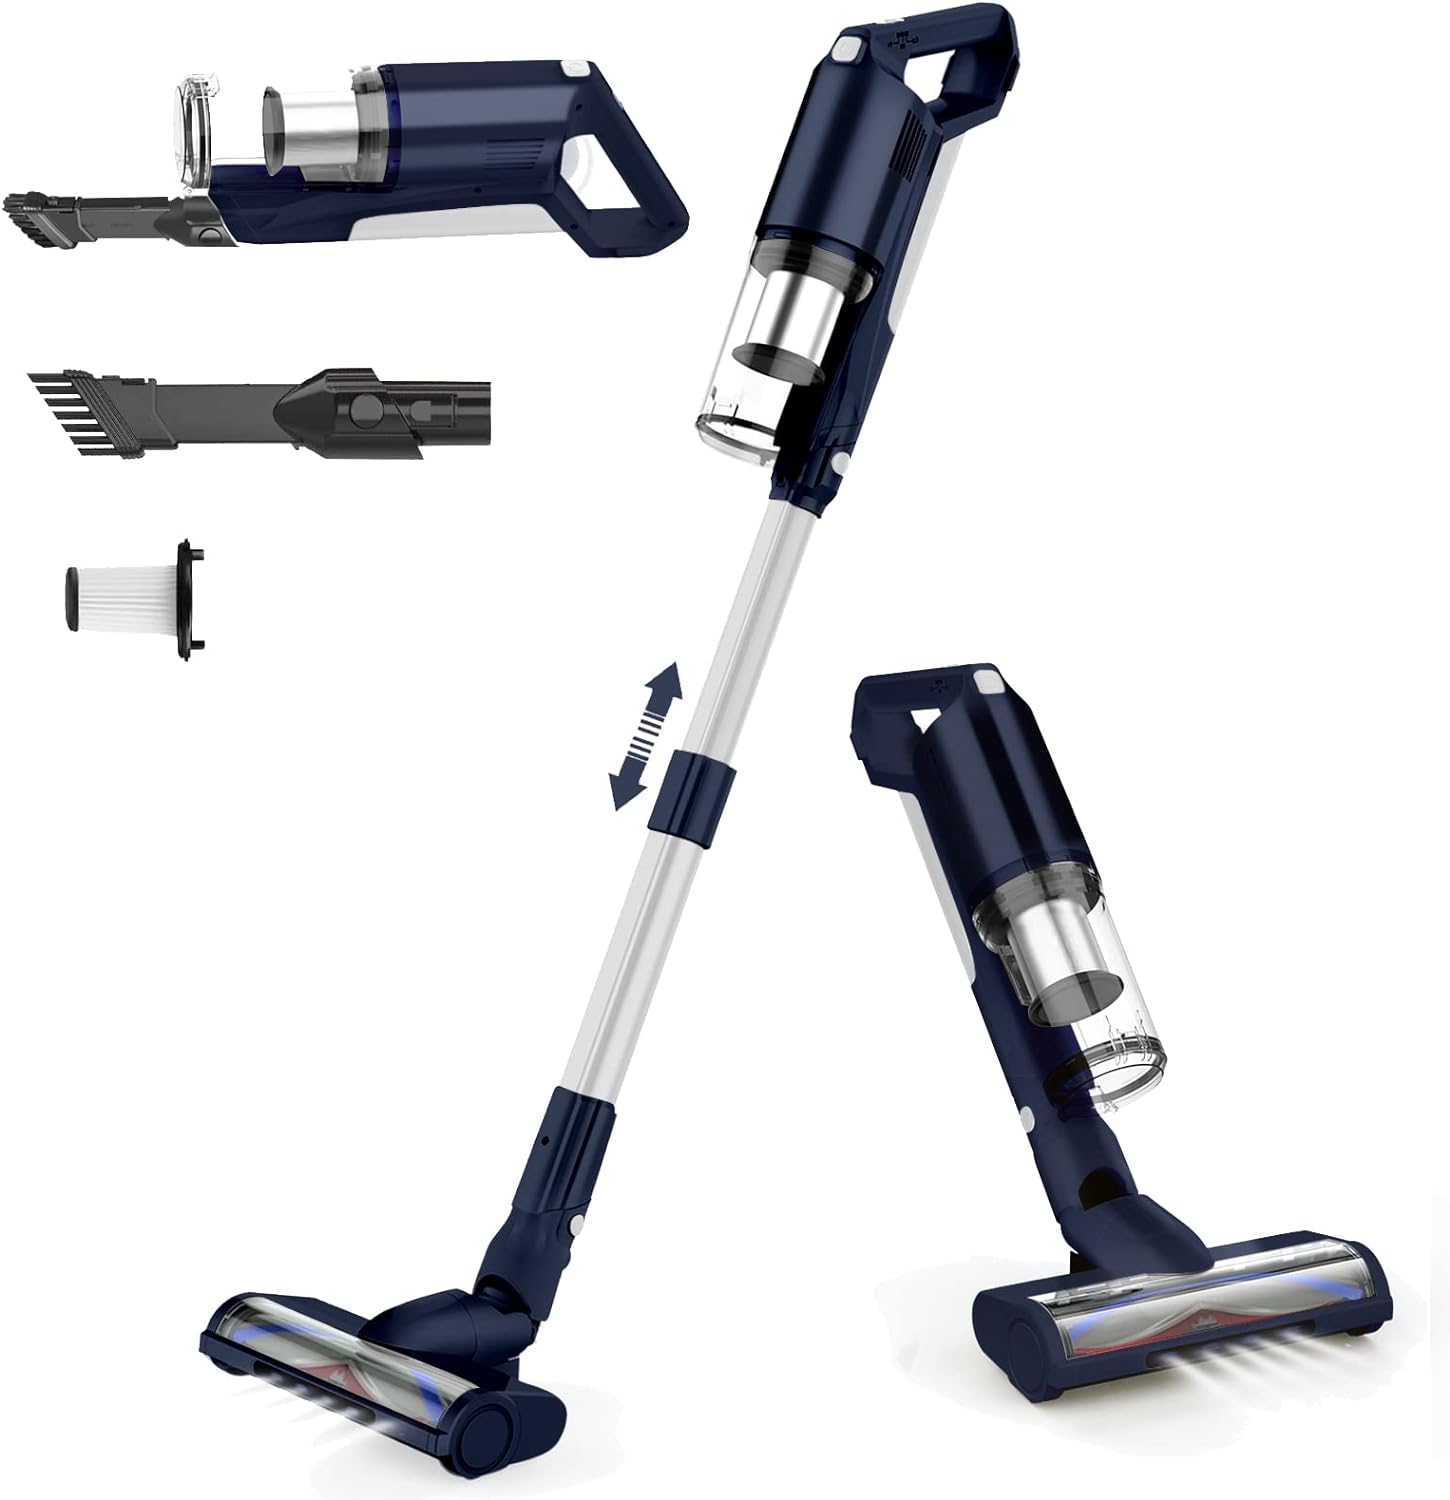 Whall 4 in 1 Foldable 280W Brushless Handheld Lightweight Motor Cordless Stick Vacuum Blue-Silver Color